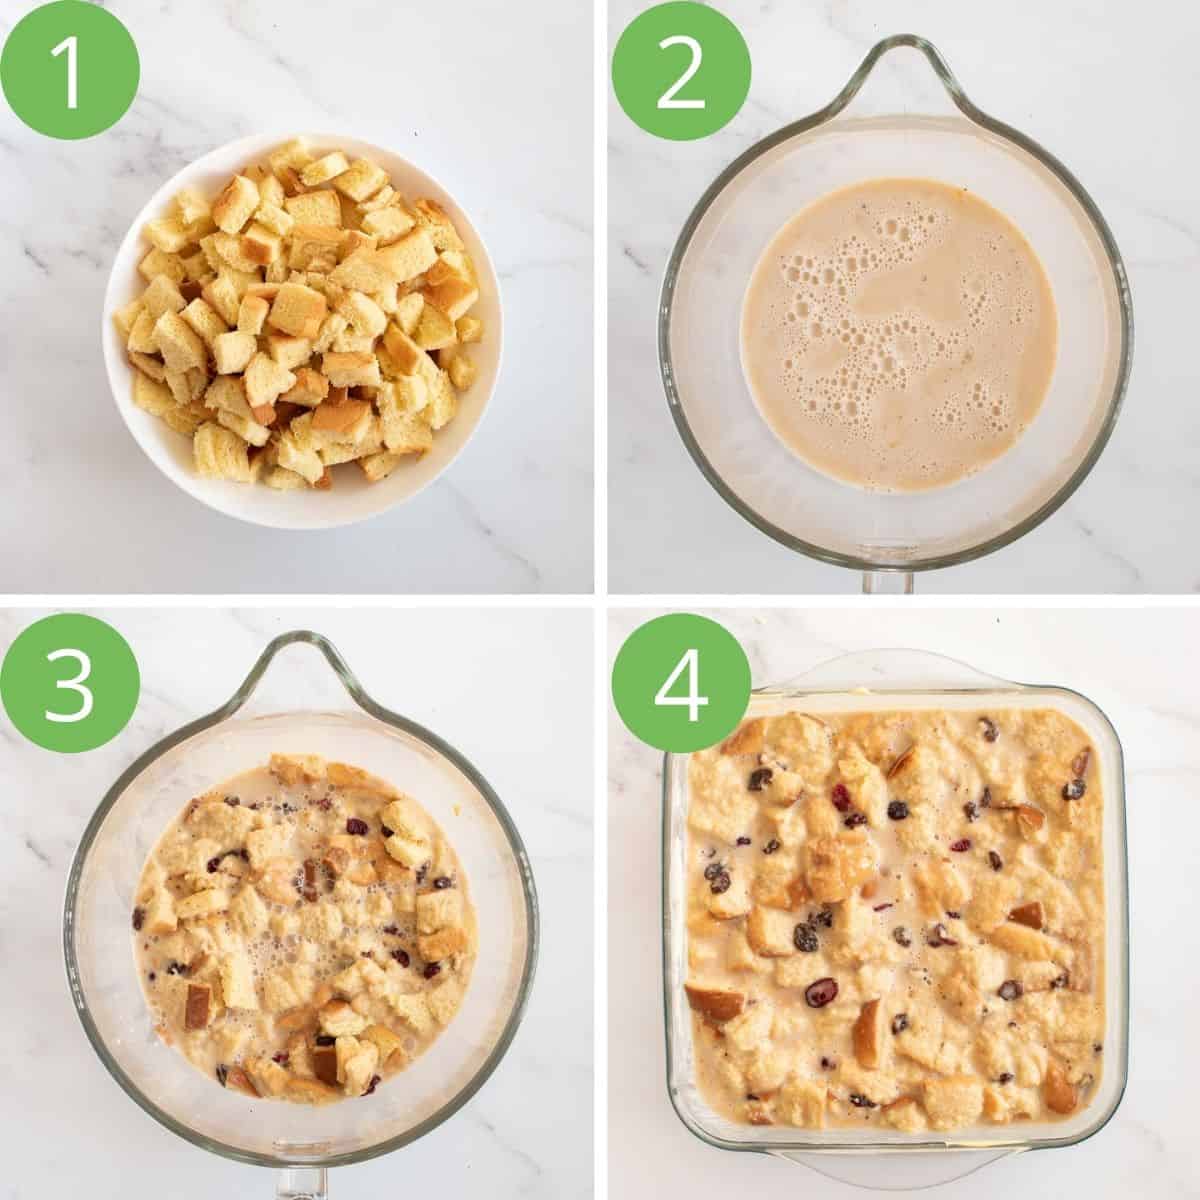 Step by step instructions showing how to make this recipe.